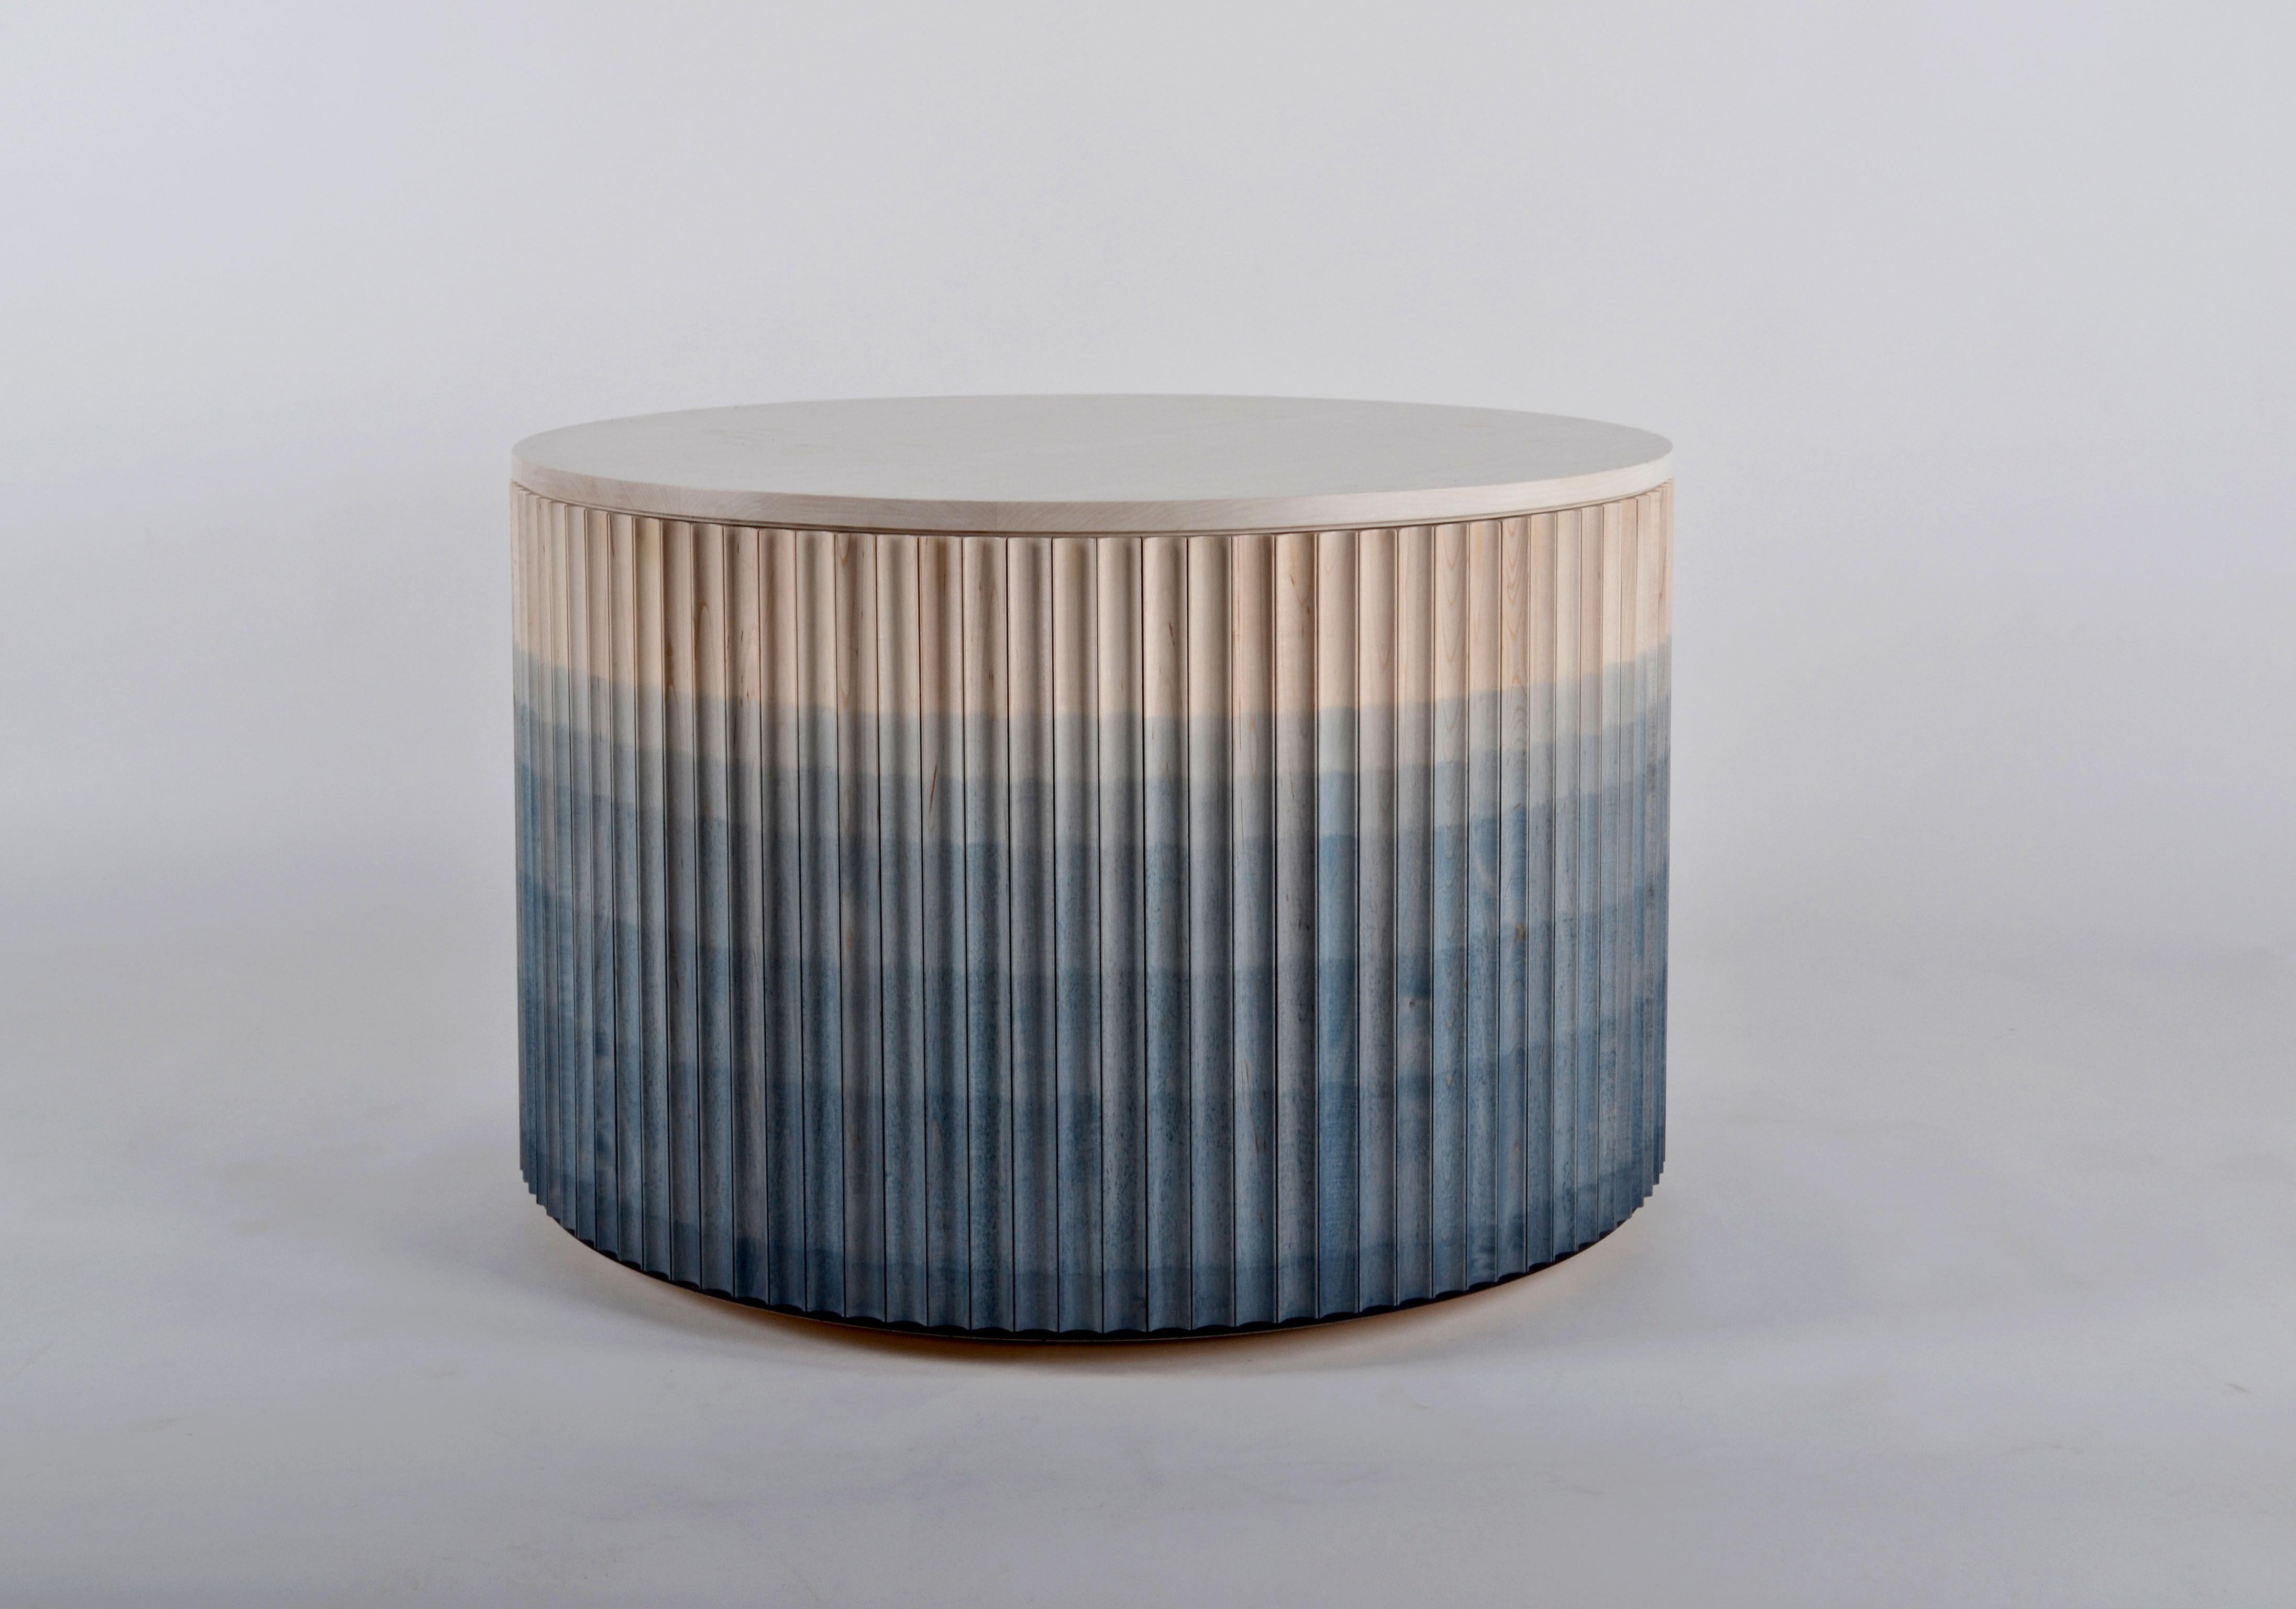 Pilar occasional table by Indo Made
One of a kind
Dimensions: Ø60.9 X H45.7 cm 
Materials: maple with cobalt blue ombre finish.

Also available in other materials. 
Each piece is carefully handcrafted by our team using natural materials and